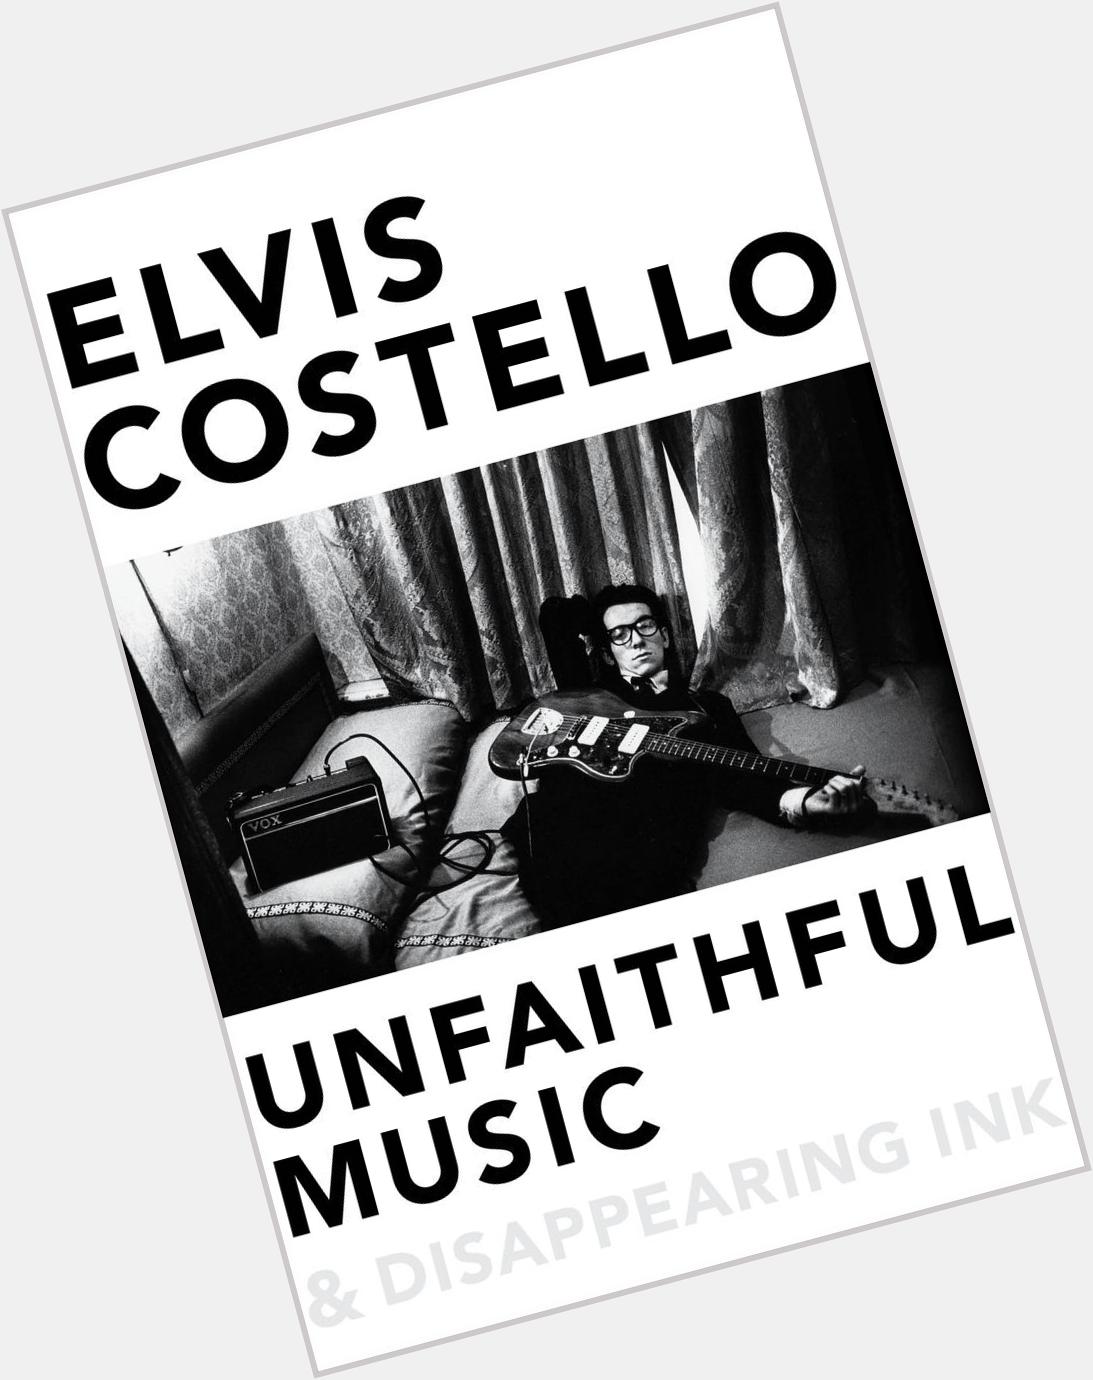 Happy Birthday to Elvis Costello! His brilliant memoir UNFAITHFUL MUSIC AN DISAPPEARING INK is published on Oct 13th 